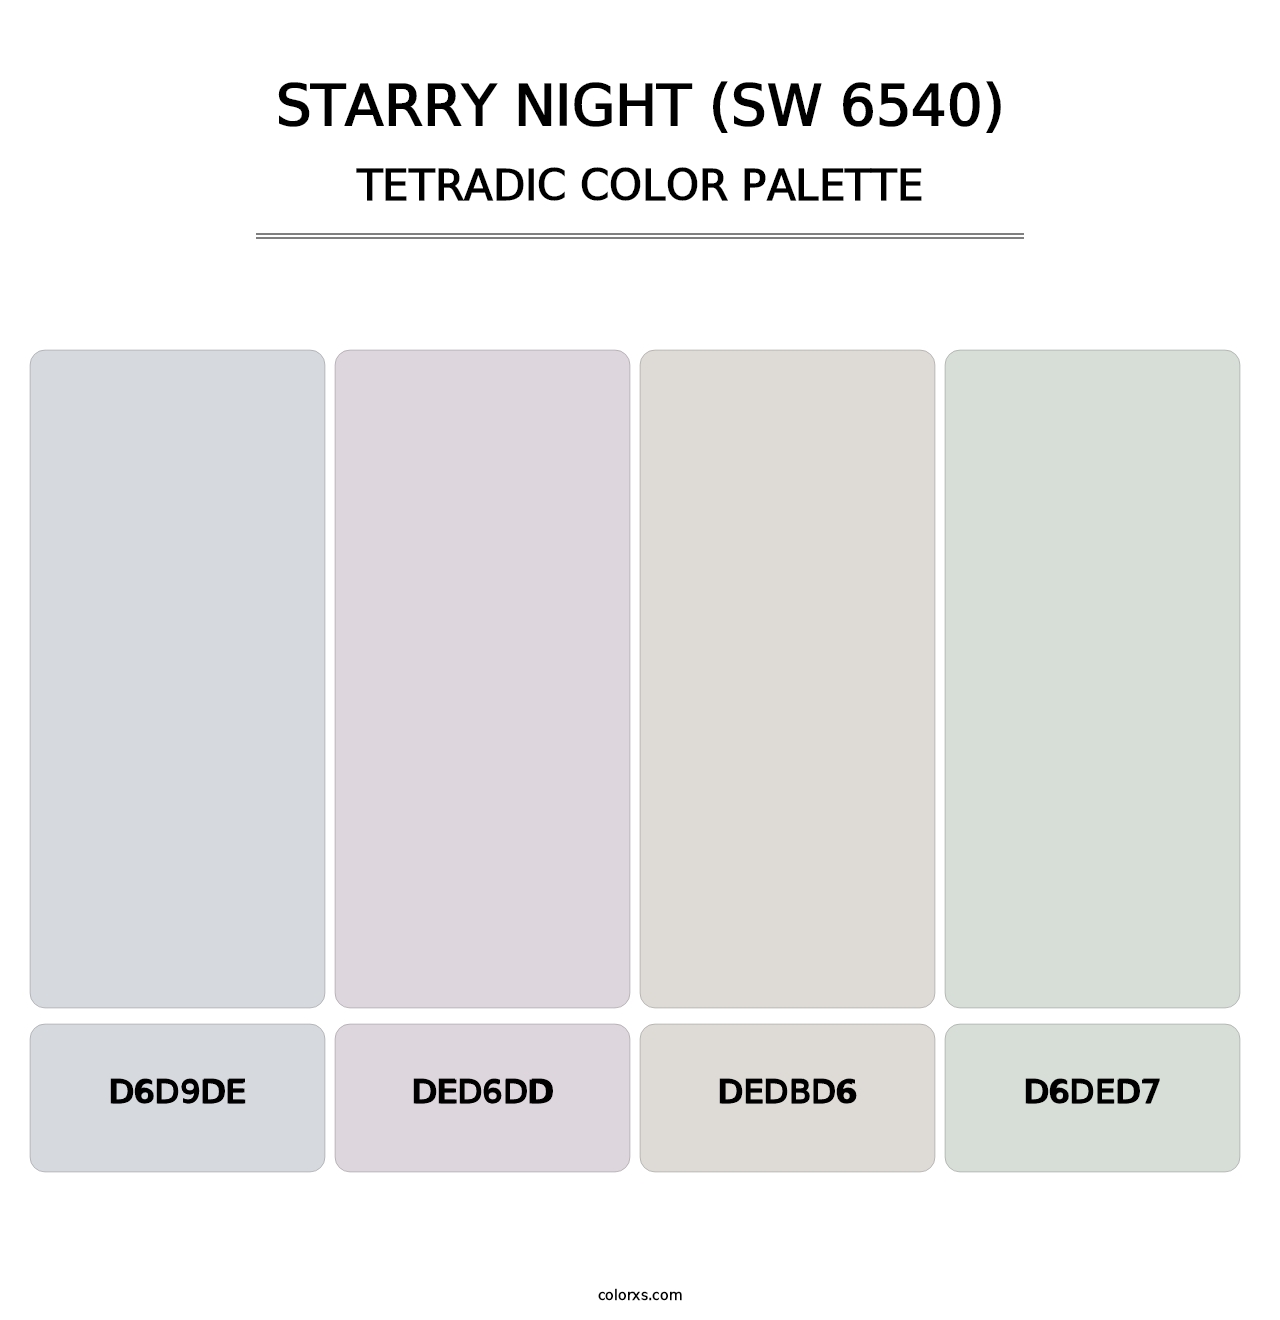 Starry Night (SW 6540) - Tetradic Color Palette